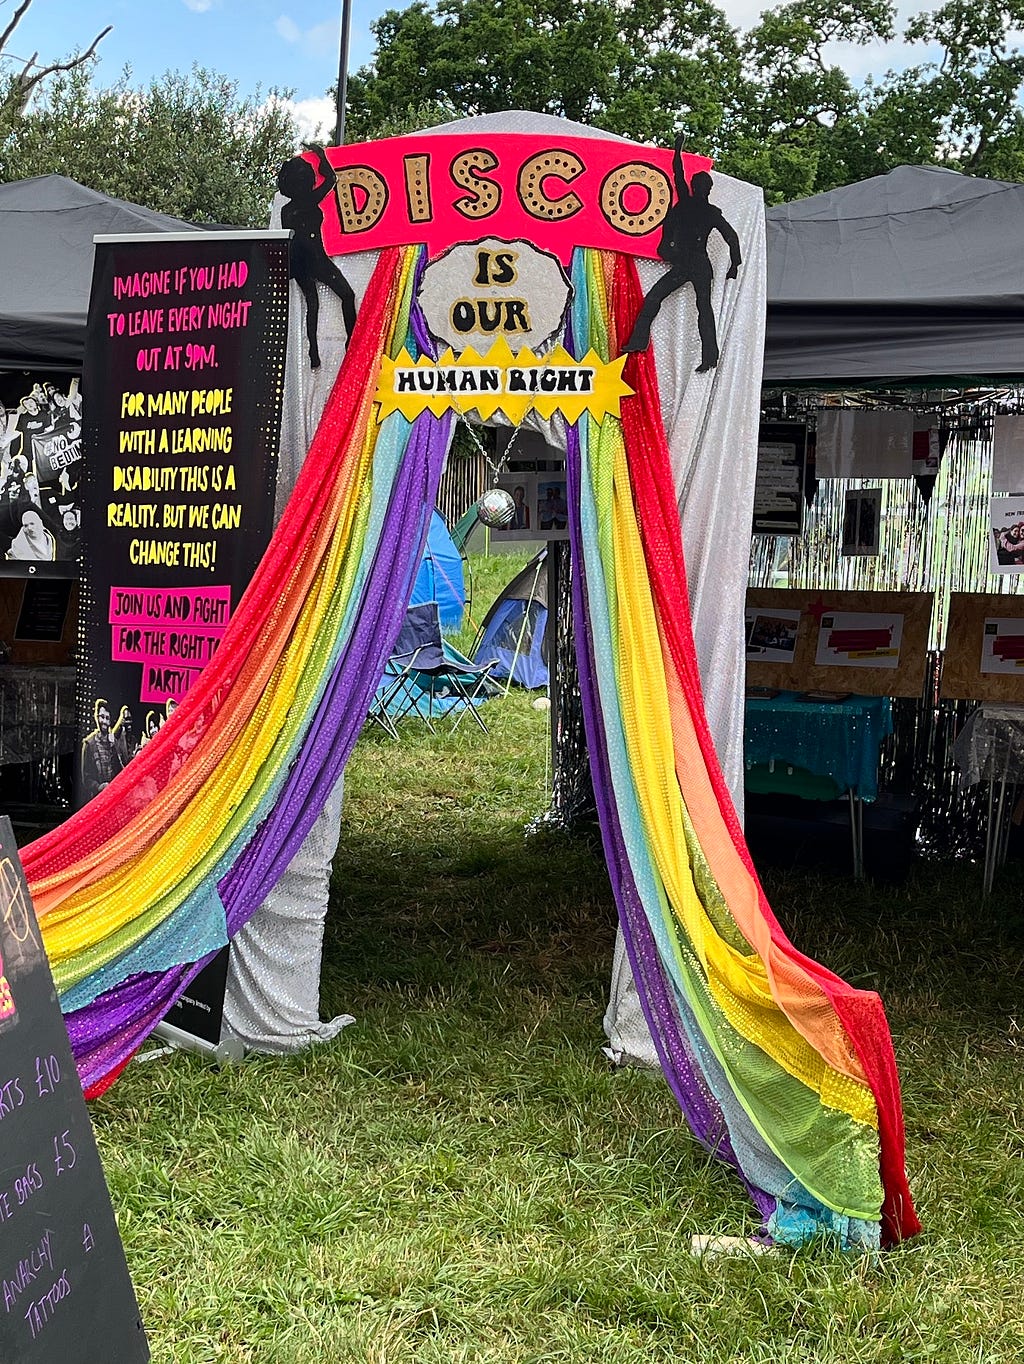 Archway to a tent draped in sparkly rainbow colours and saying ‘Disco is our human right’ above the entrance.